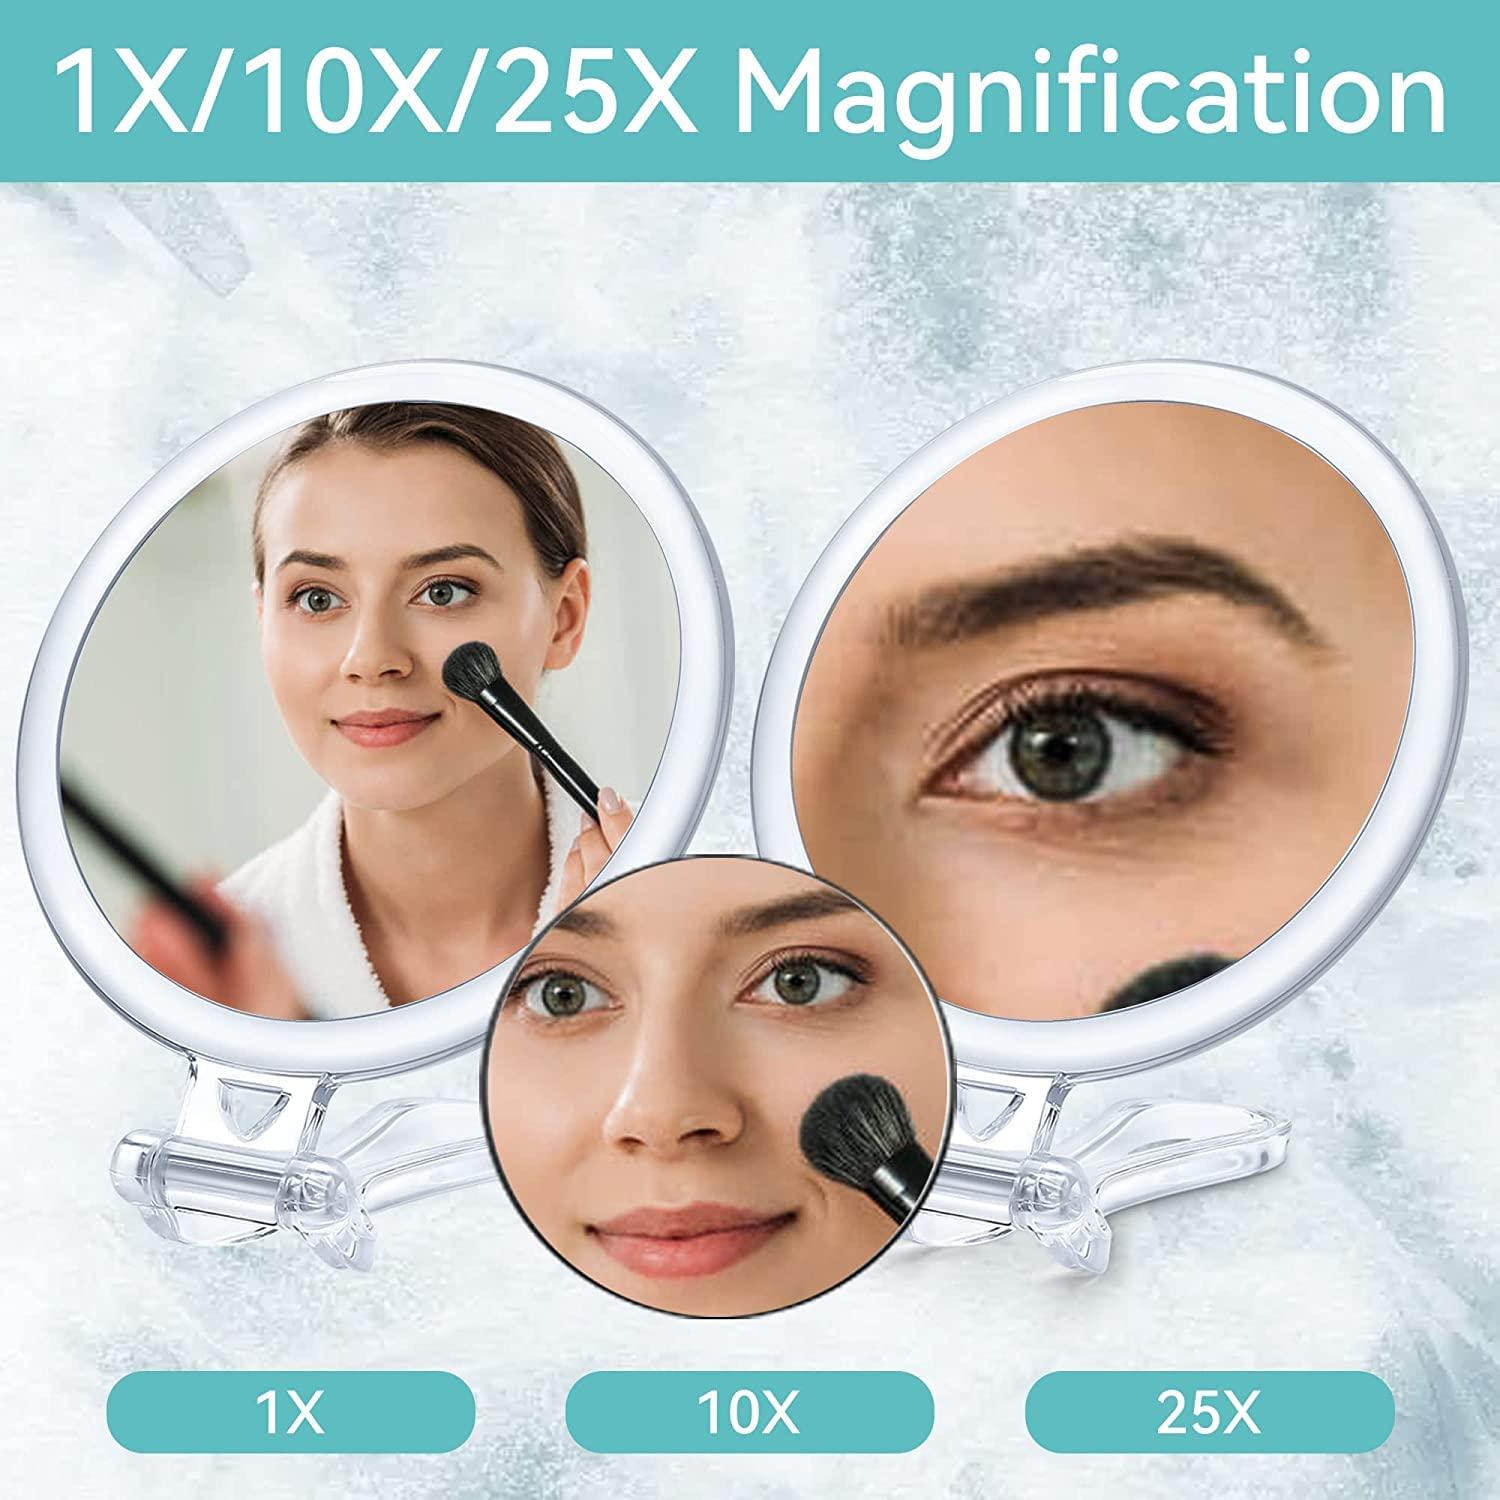 B Beauty Planet Hand Mirror, 25X/1X Double-Sided Hand Held Magnified Mirror & 10X Magnifying Mirror Suction Cup,Perfect for Precise Makeup Applications 1